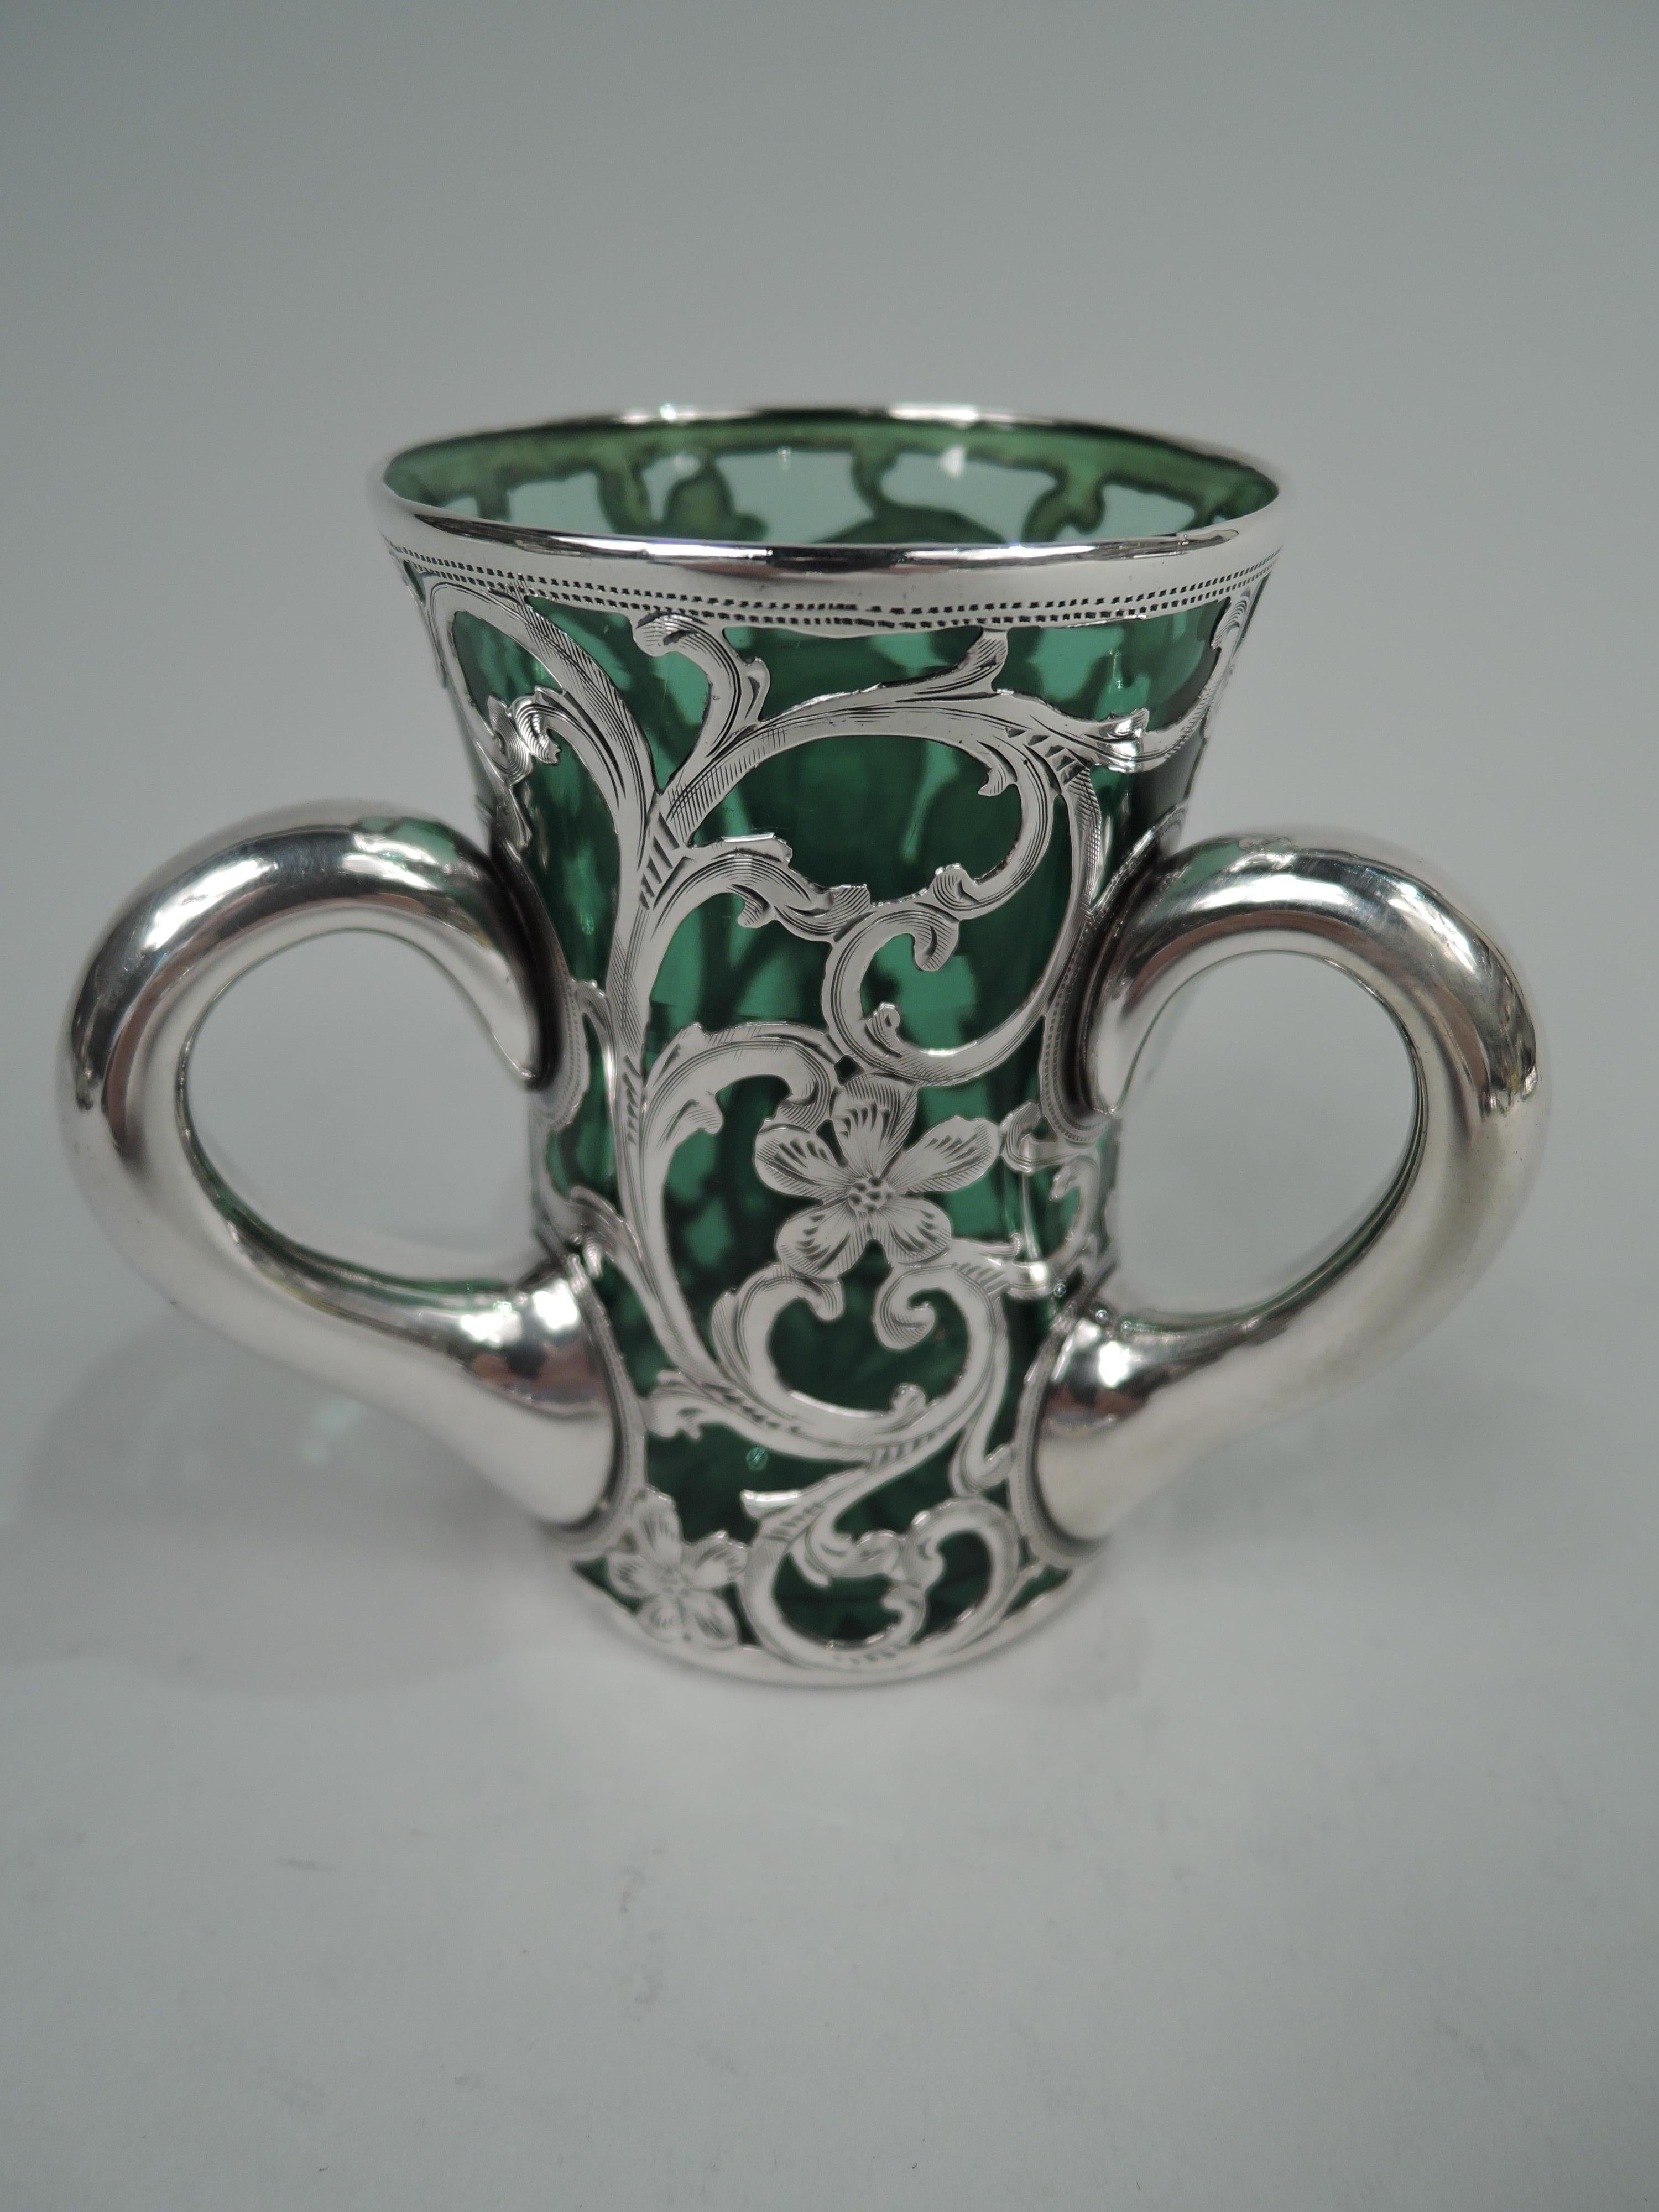 Art Nouveau Antique Alvin Sweet & Small Green Silver Overlay Loving Cup Bud Vase